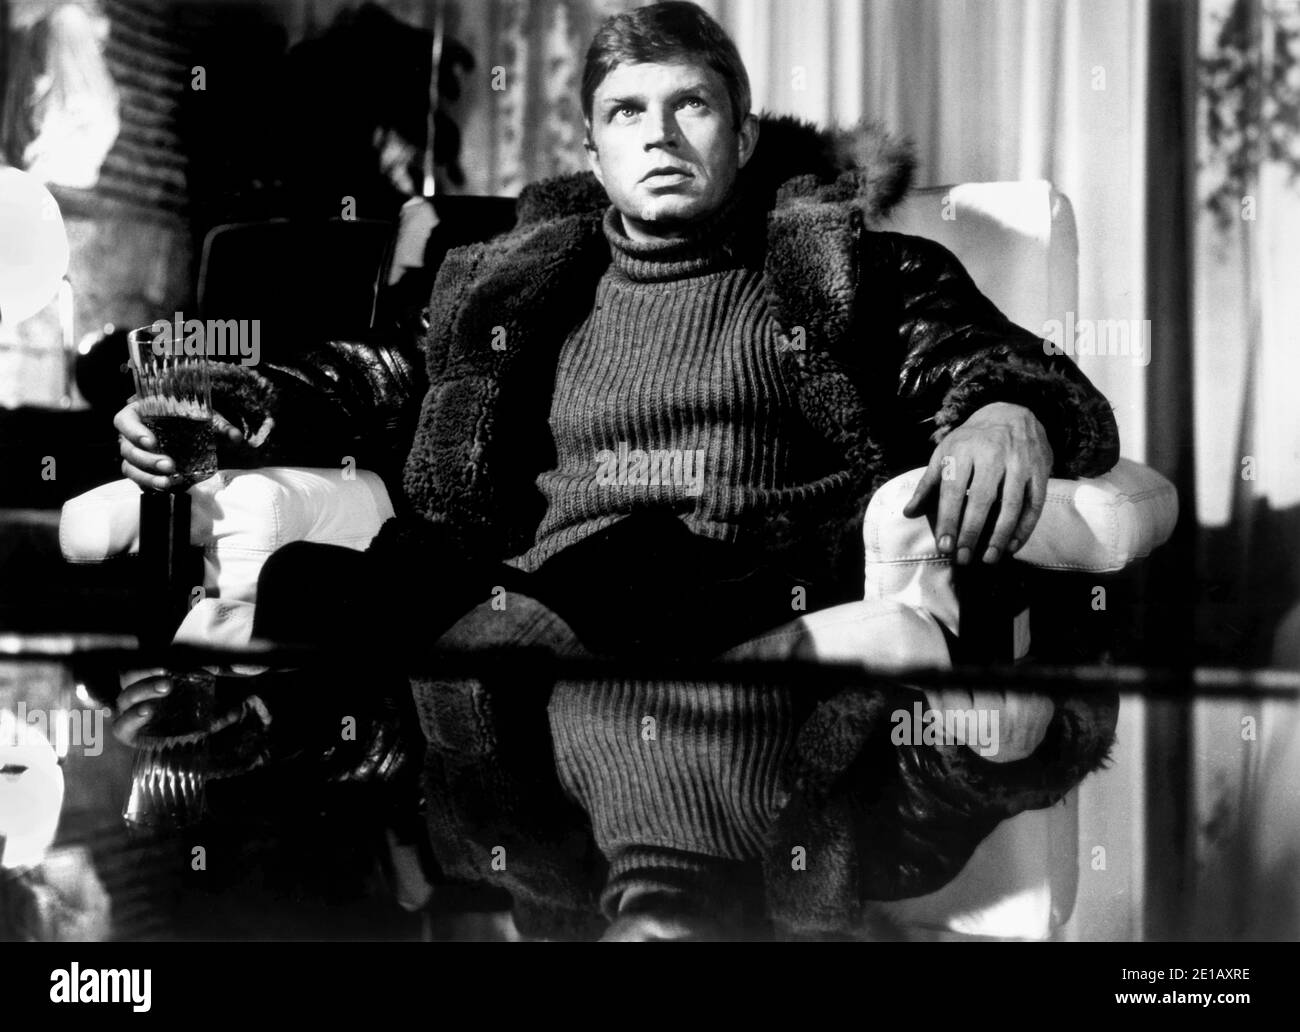 Hardy Kruger, Seated Publicity Portrait for the Soviet/Italian Film, 'The Red Tent', Russian: Krasnaya palatka, Italian: La tenda rossa, Vides Cinematografica, 1969 USA Release via Paramount Pictures, 1971 Stock Photo